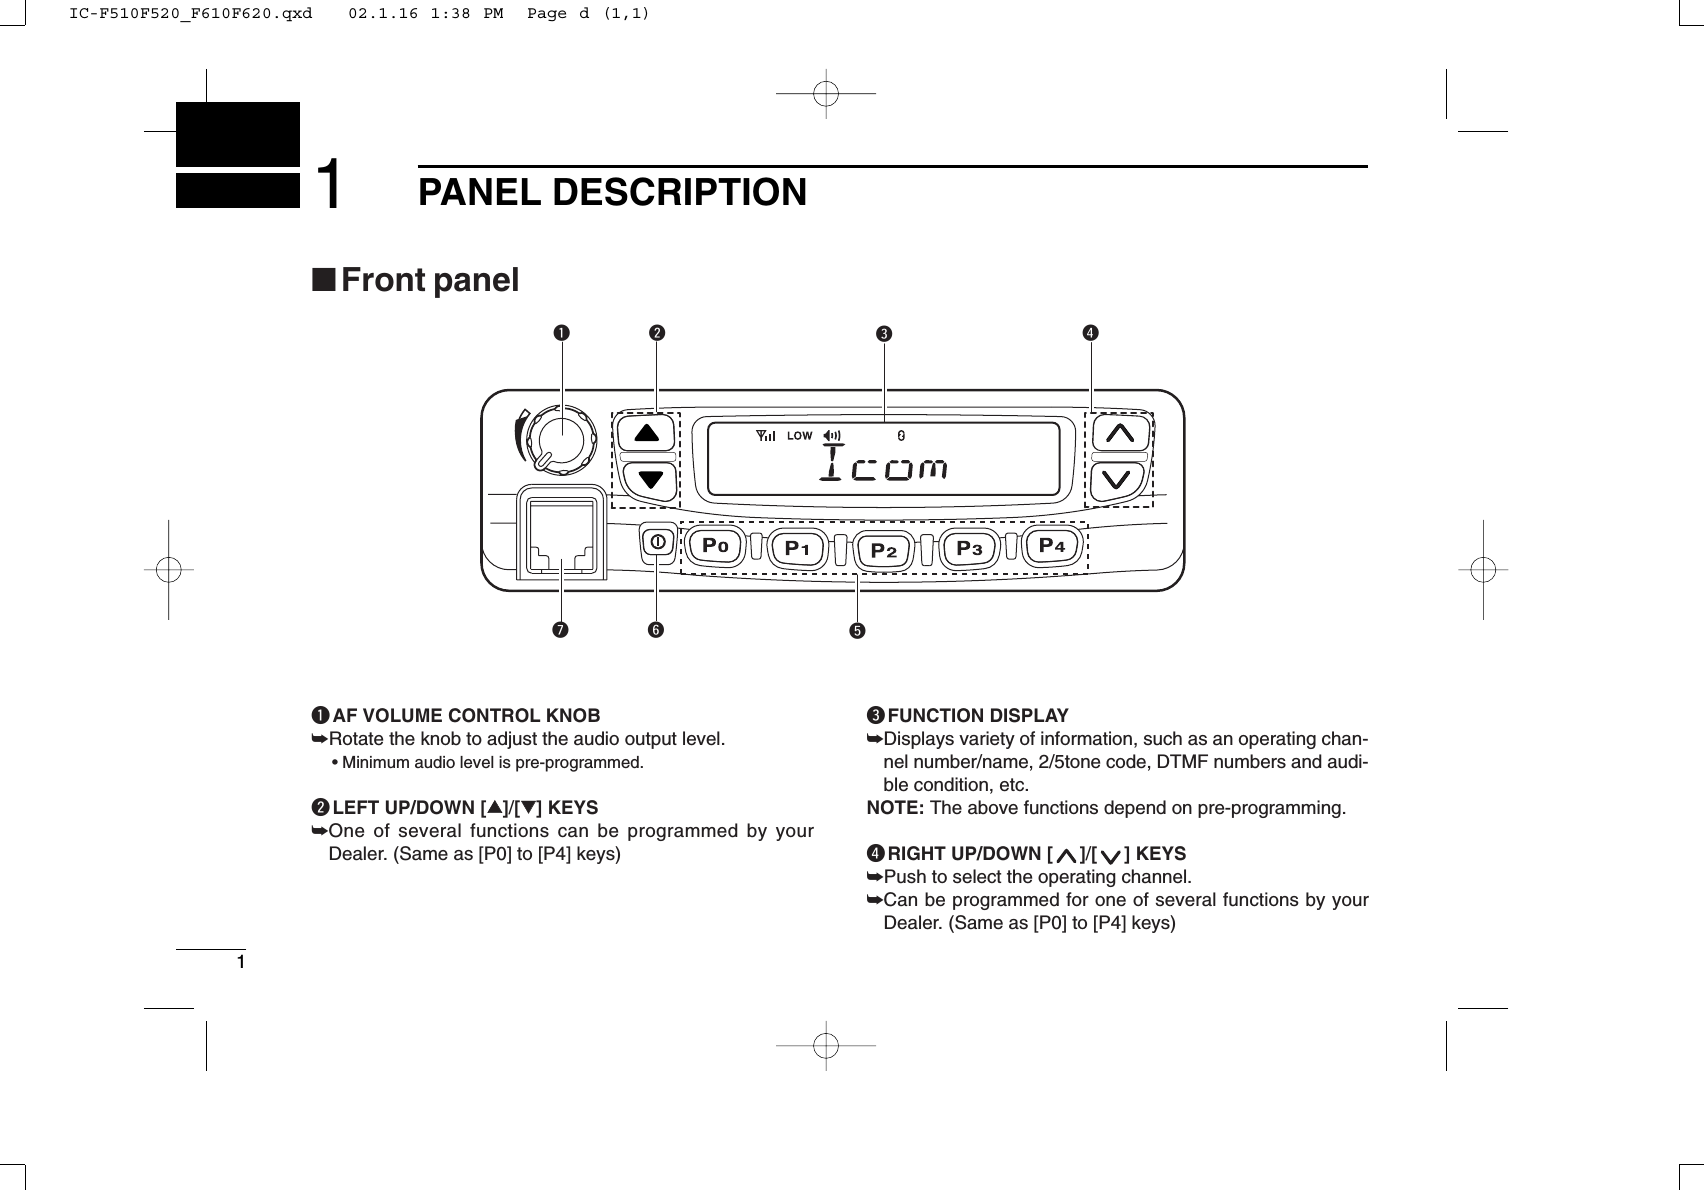 11PANEL DESCRIPTIONuytrewq■Front panelqAF VOLUME CONTROL KNOB➥Rotate the knob to adjust the audio output level.• Minimum audio level is pre-programmed.wLEFT UP/DOWN [∫∫]/[√√] KEYS➥One of several functions can be programmed by yourDealer. (Same as [P0] to [P4] keys)eFUNCTION DISPLAY➥Displays variety of information, such as an operating chan-nel number/name, 2/5tone code, DTMF numbers and audi-ble condition, etc.NOTE: The above functions depend on pre-programming.rRIGHT UP/DOWN [ ]/[ ] KEYS➥Push to select the operating channel.➥Can be programmed for one of several functions by yourDealer. (Same as [P0] to [P4] keys)IC-F510F520_F610F620.qxd   02.1.16 1:38 PM  Page d (1,1)